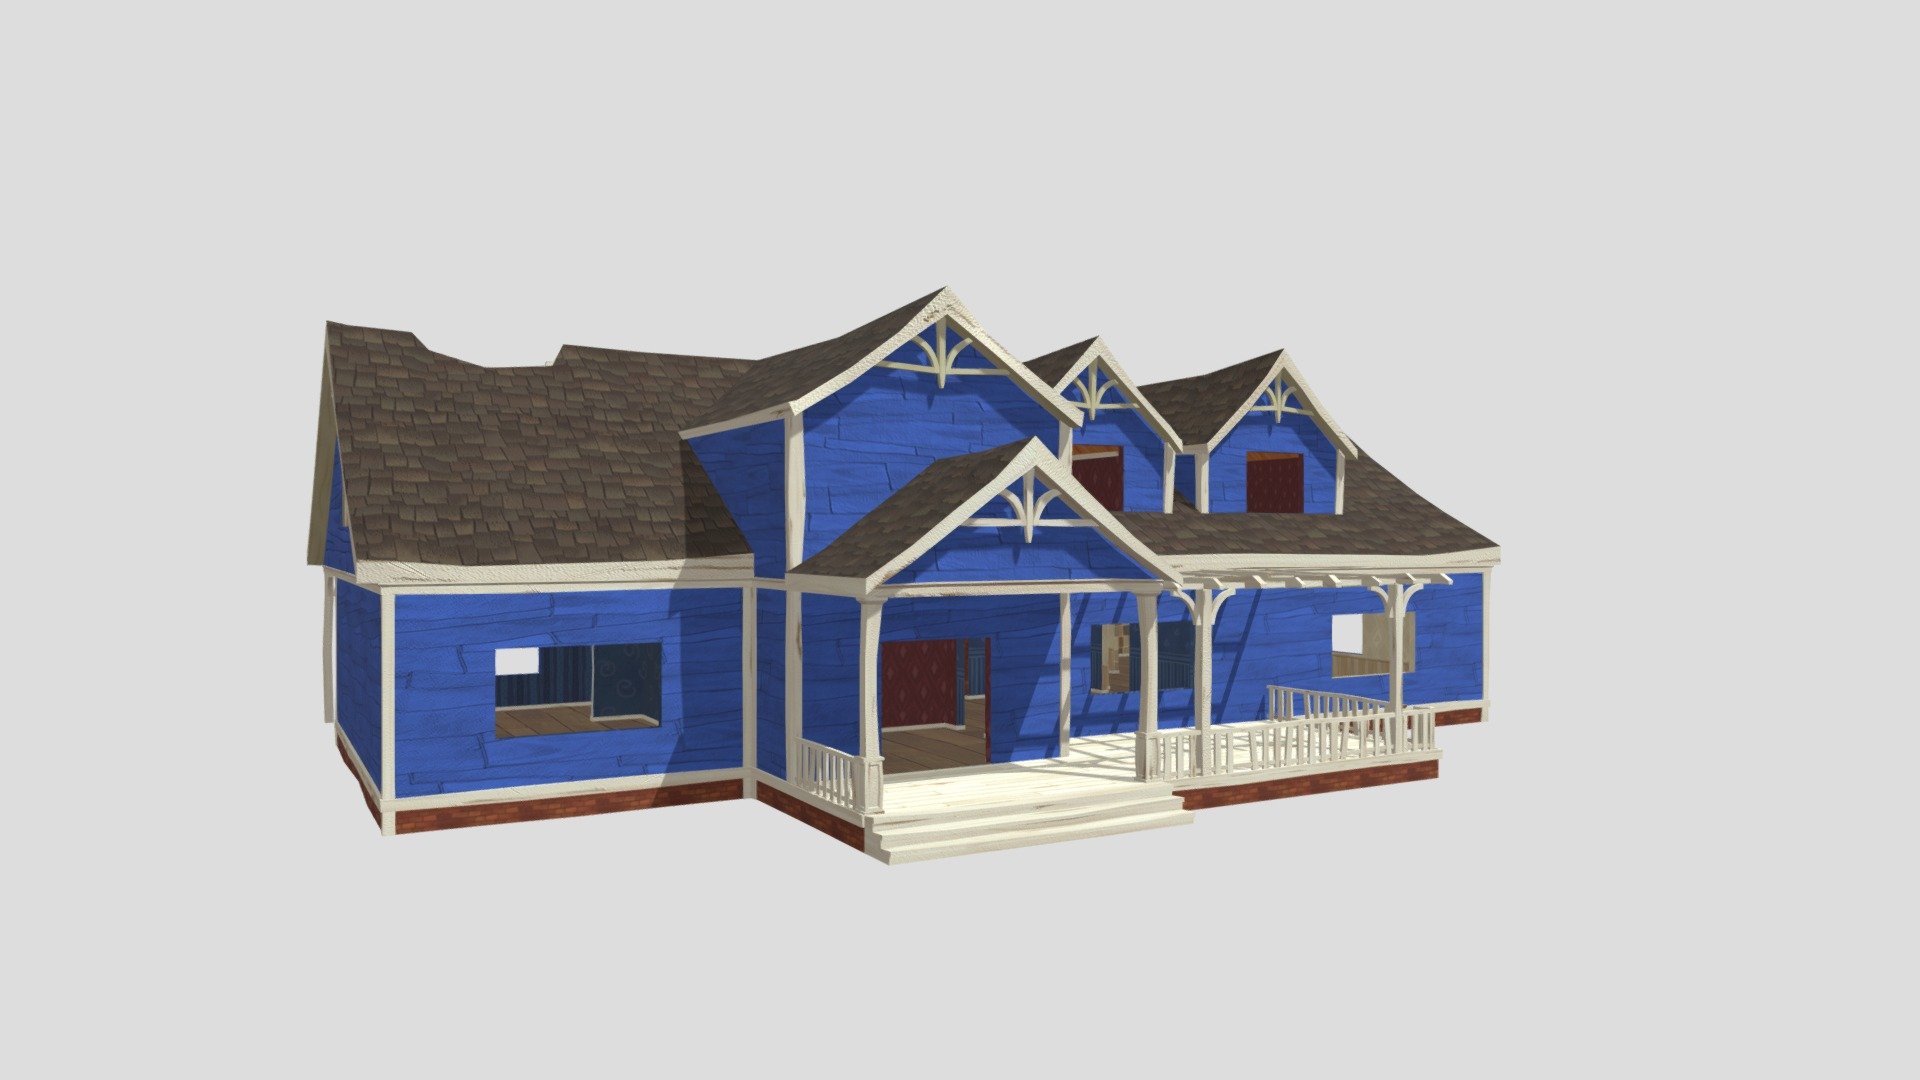 Neighbors House Alpha 2 Download Free 3d Model By Youthful Strawbewwy Youthful Strawberry Af548ee - hello neighbor alpha 2 in roblox